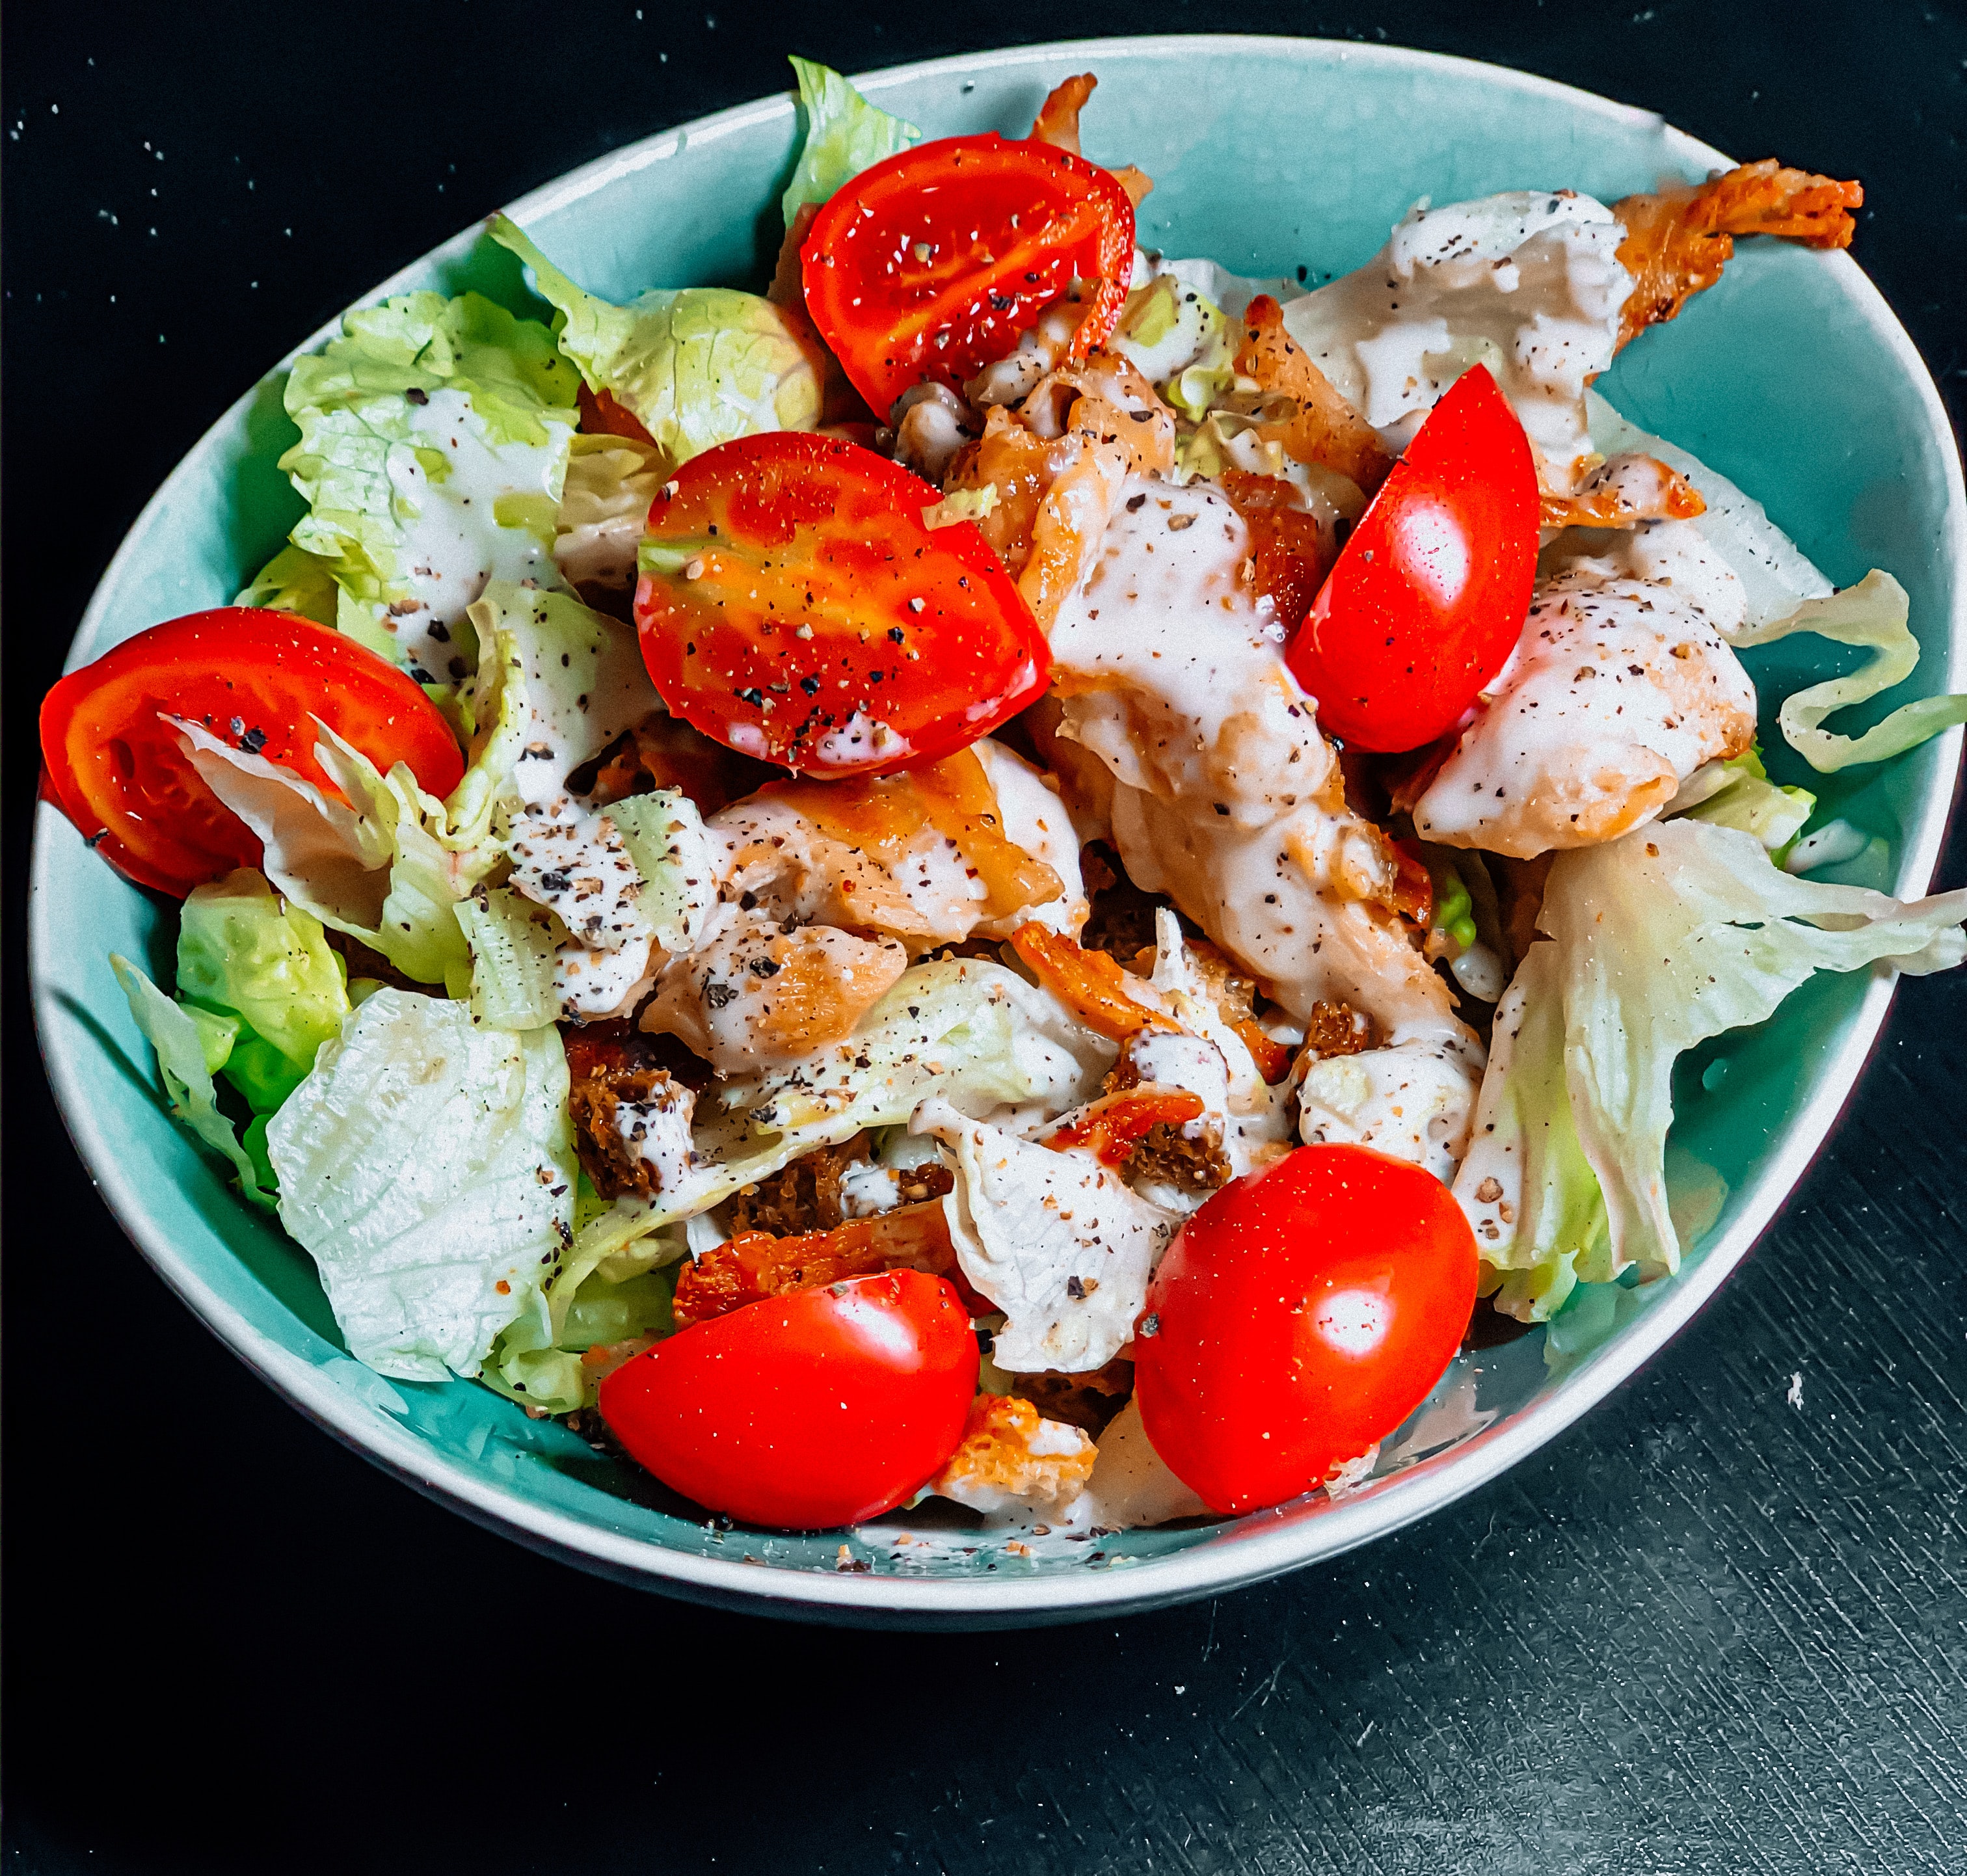 Factors to Consider Before Freezing Chicken Salad